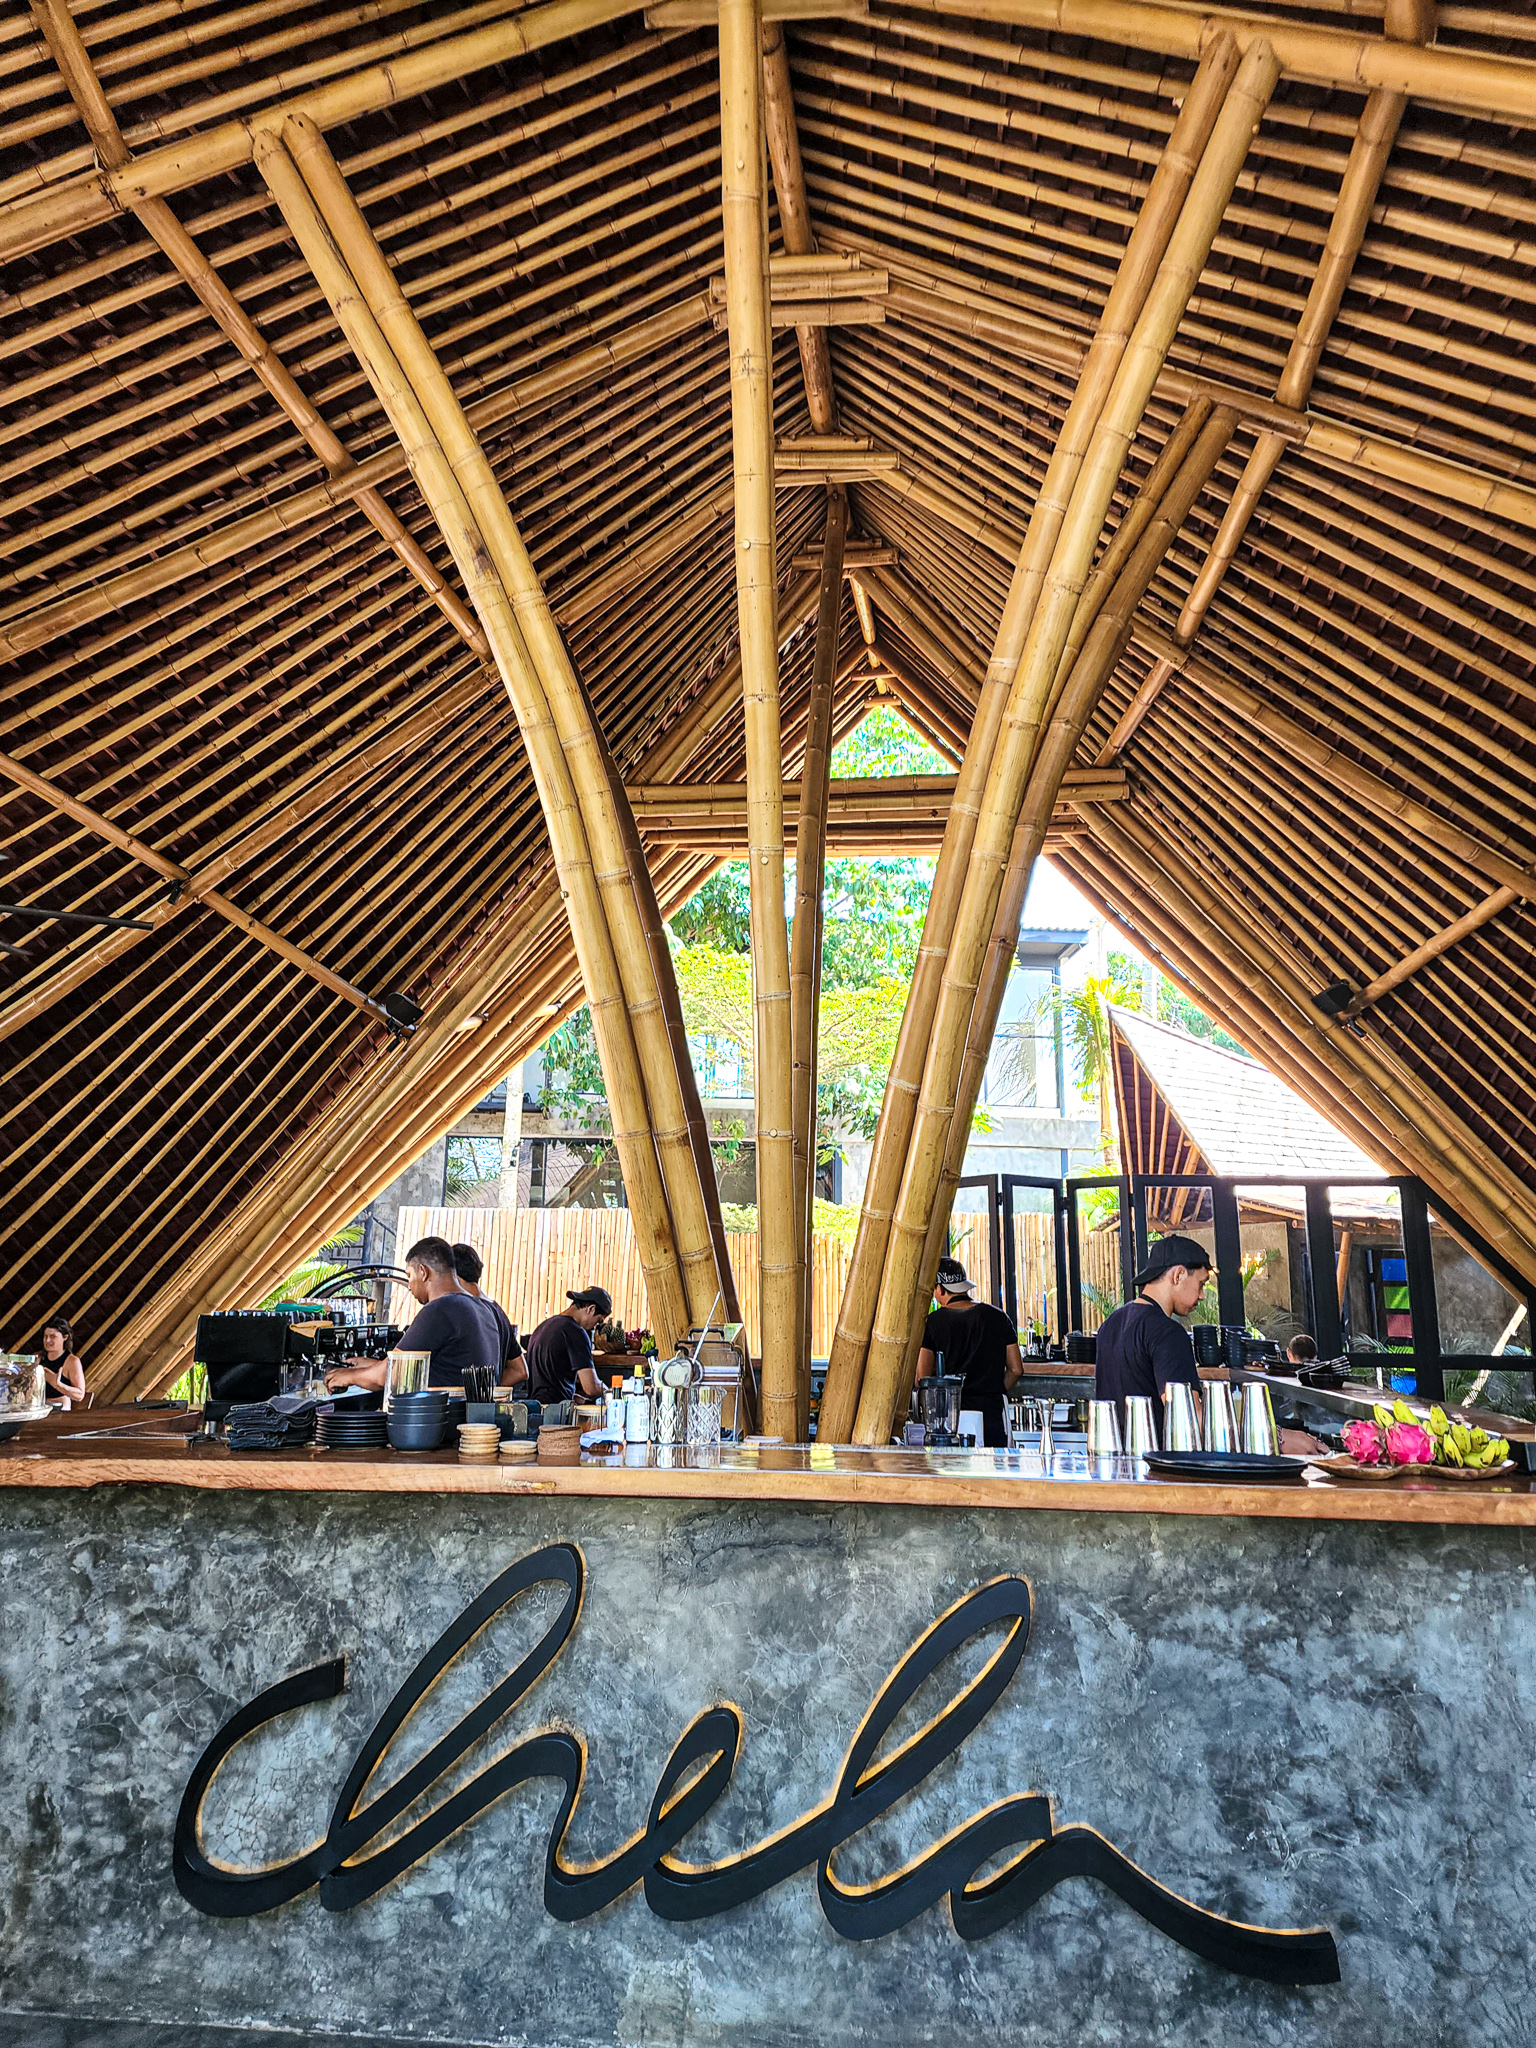 Chela the best coffee in uluwatu bali Indonesia cafe recommendations